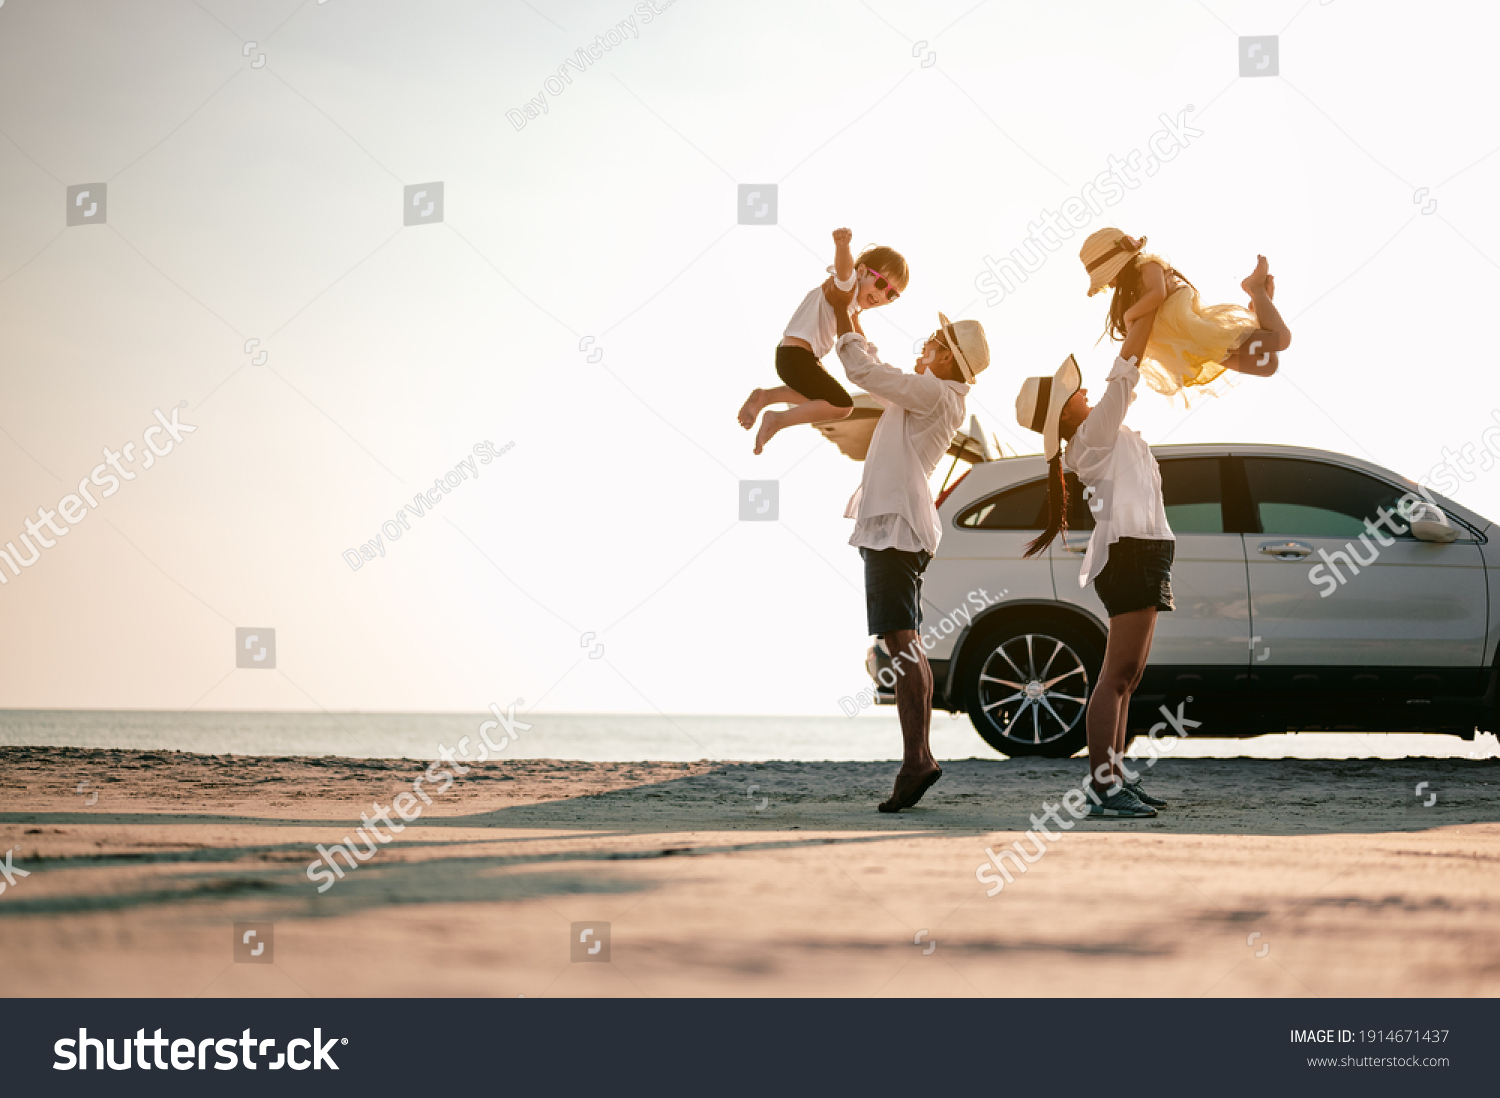 Family vacation holiday,Happy family, parents holding children flying in the sky.Concept family and Holiday and travel. #1914671437